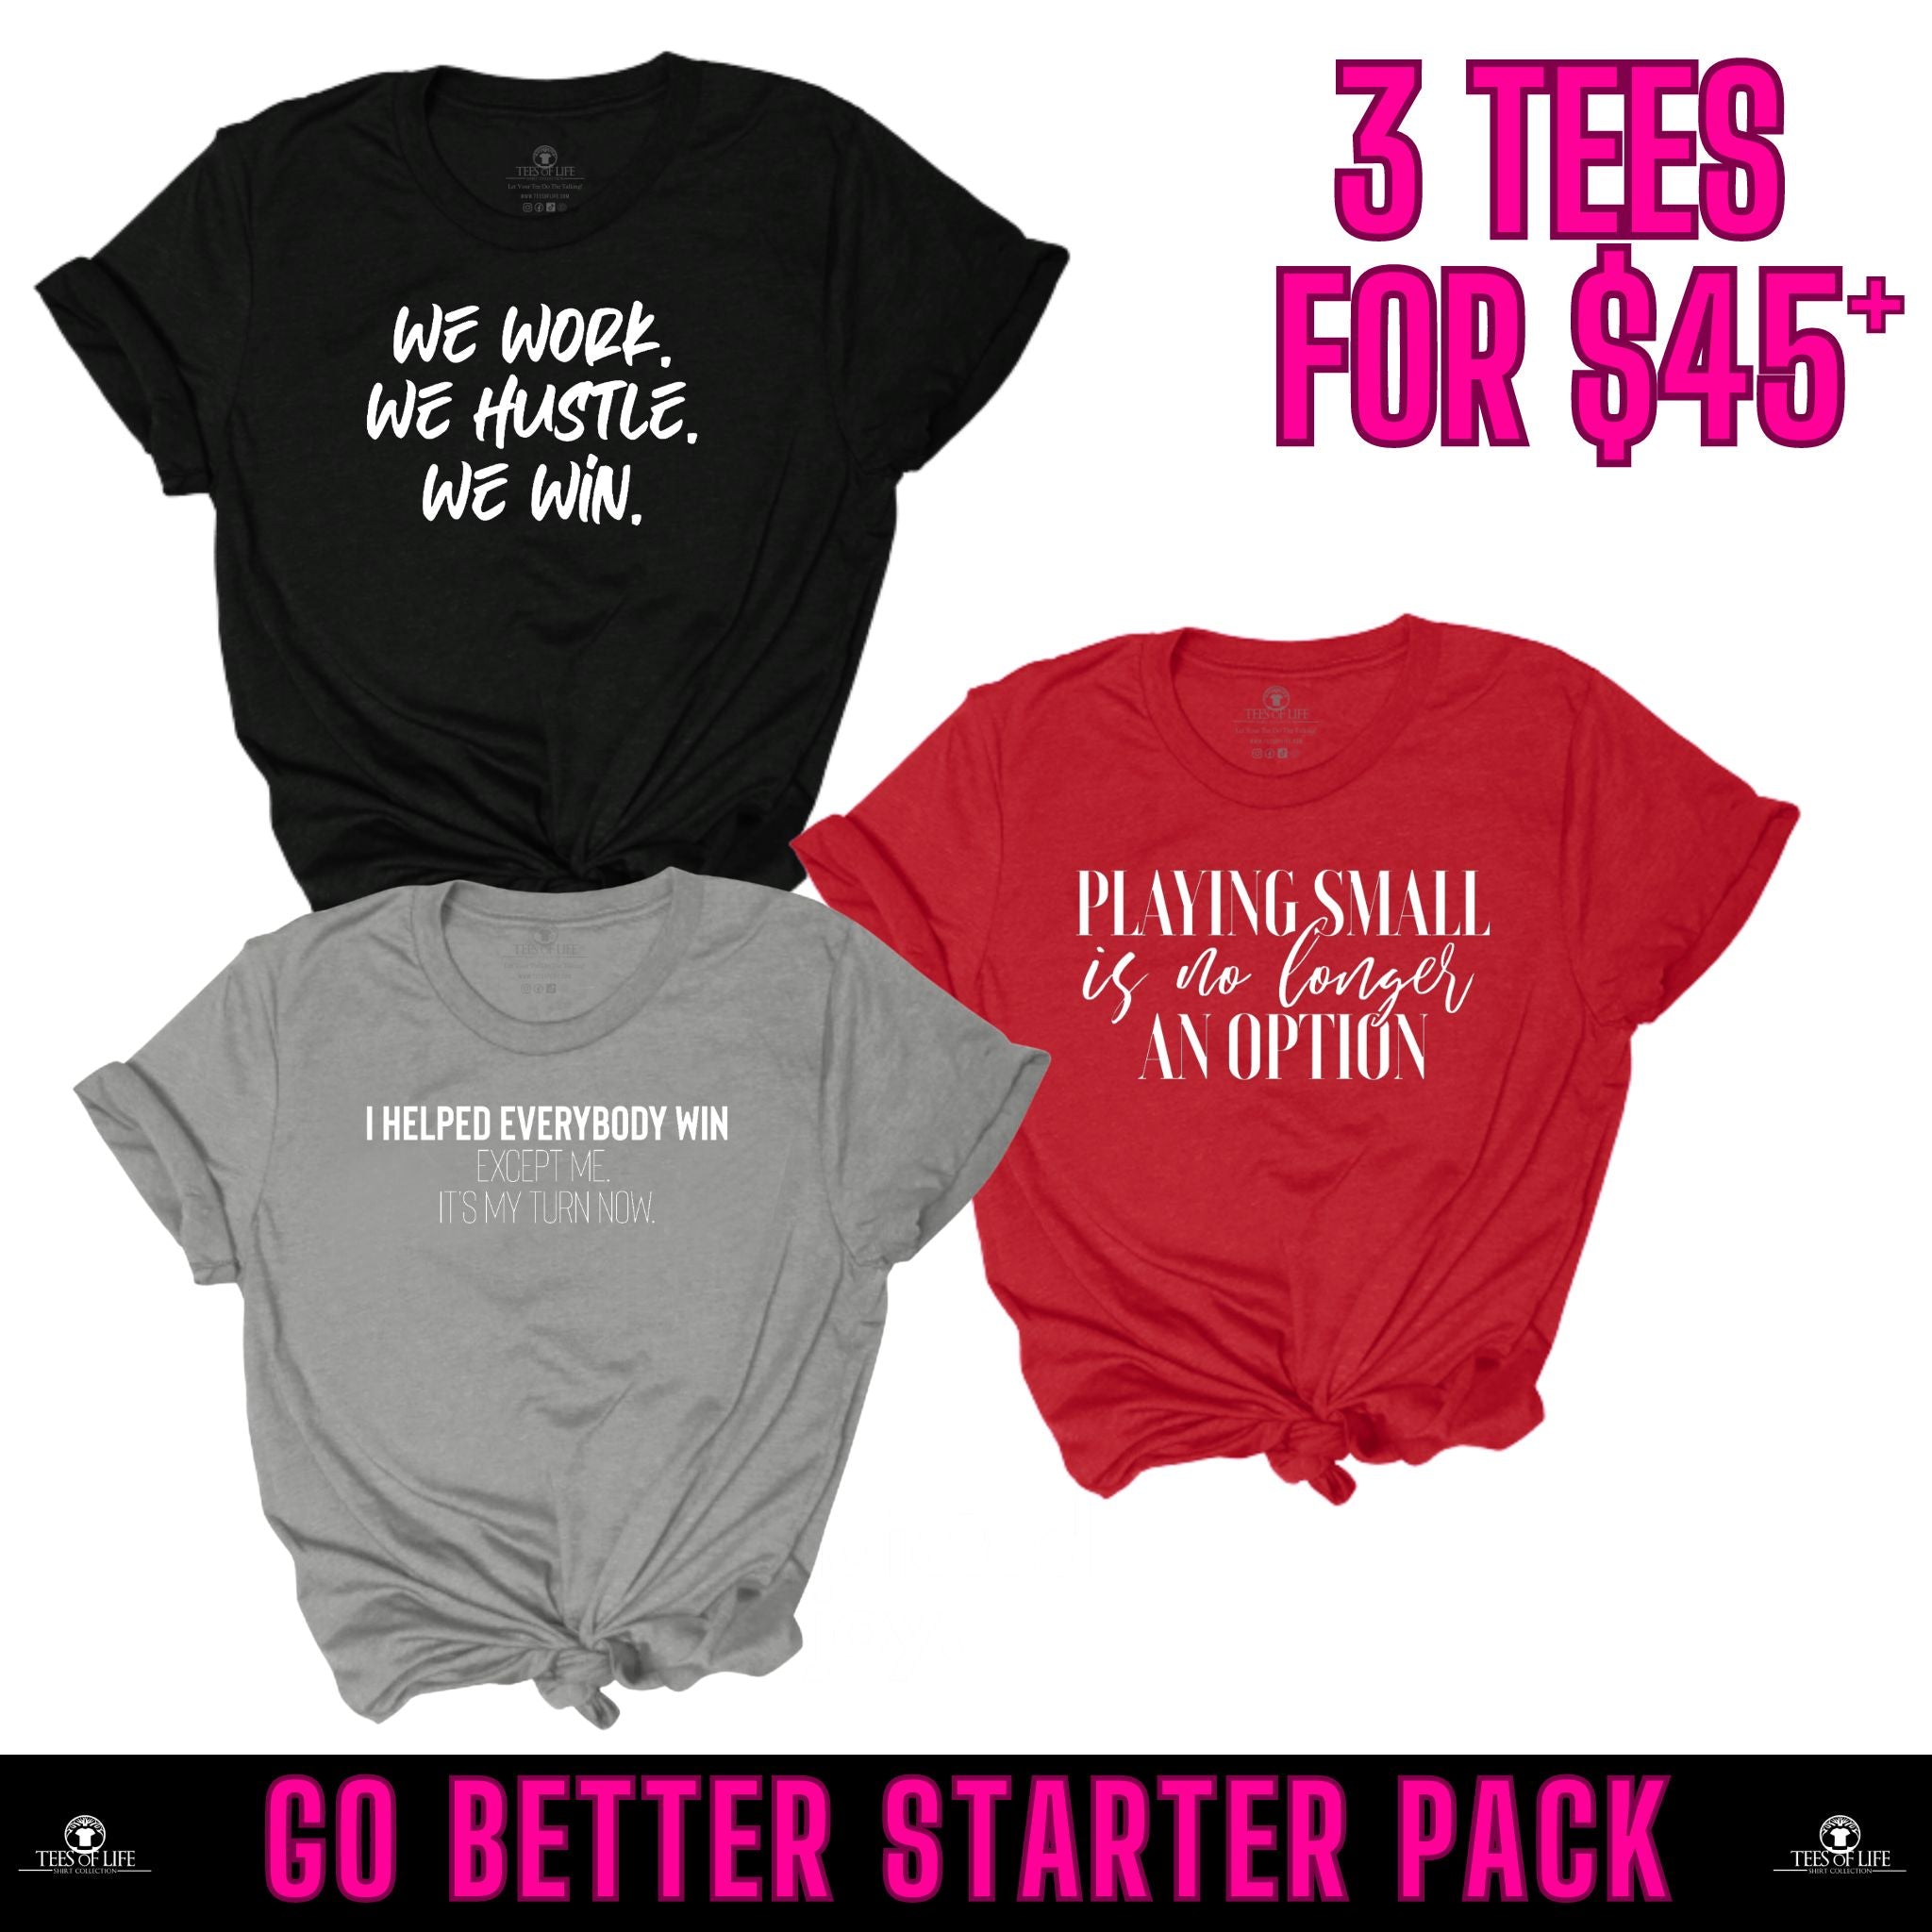 Go Getter Starter Pack Unisex Tees(We Work, Playing Small, My Time Now)